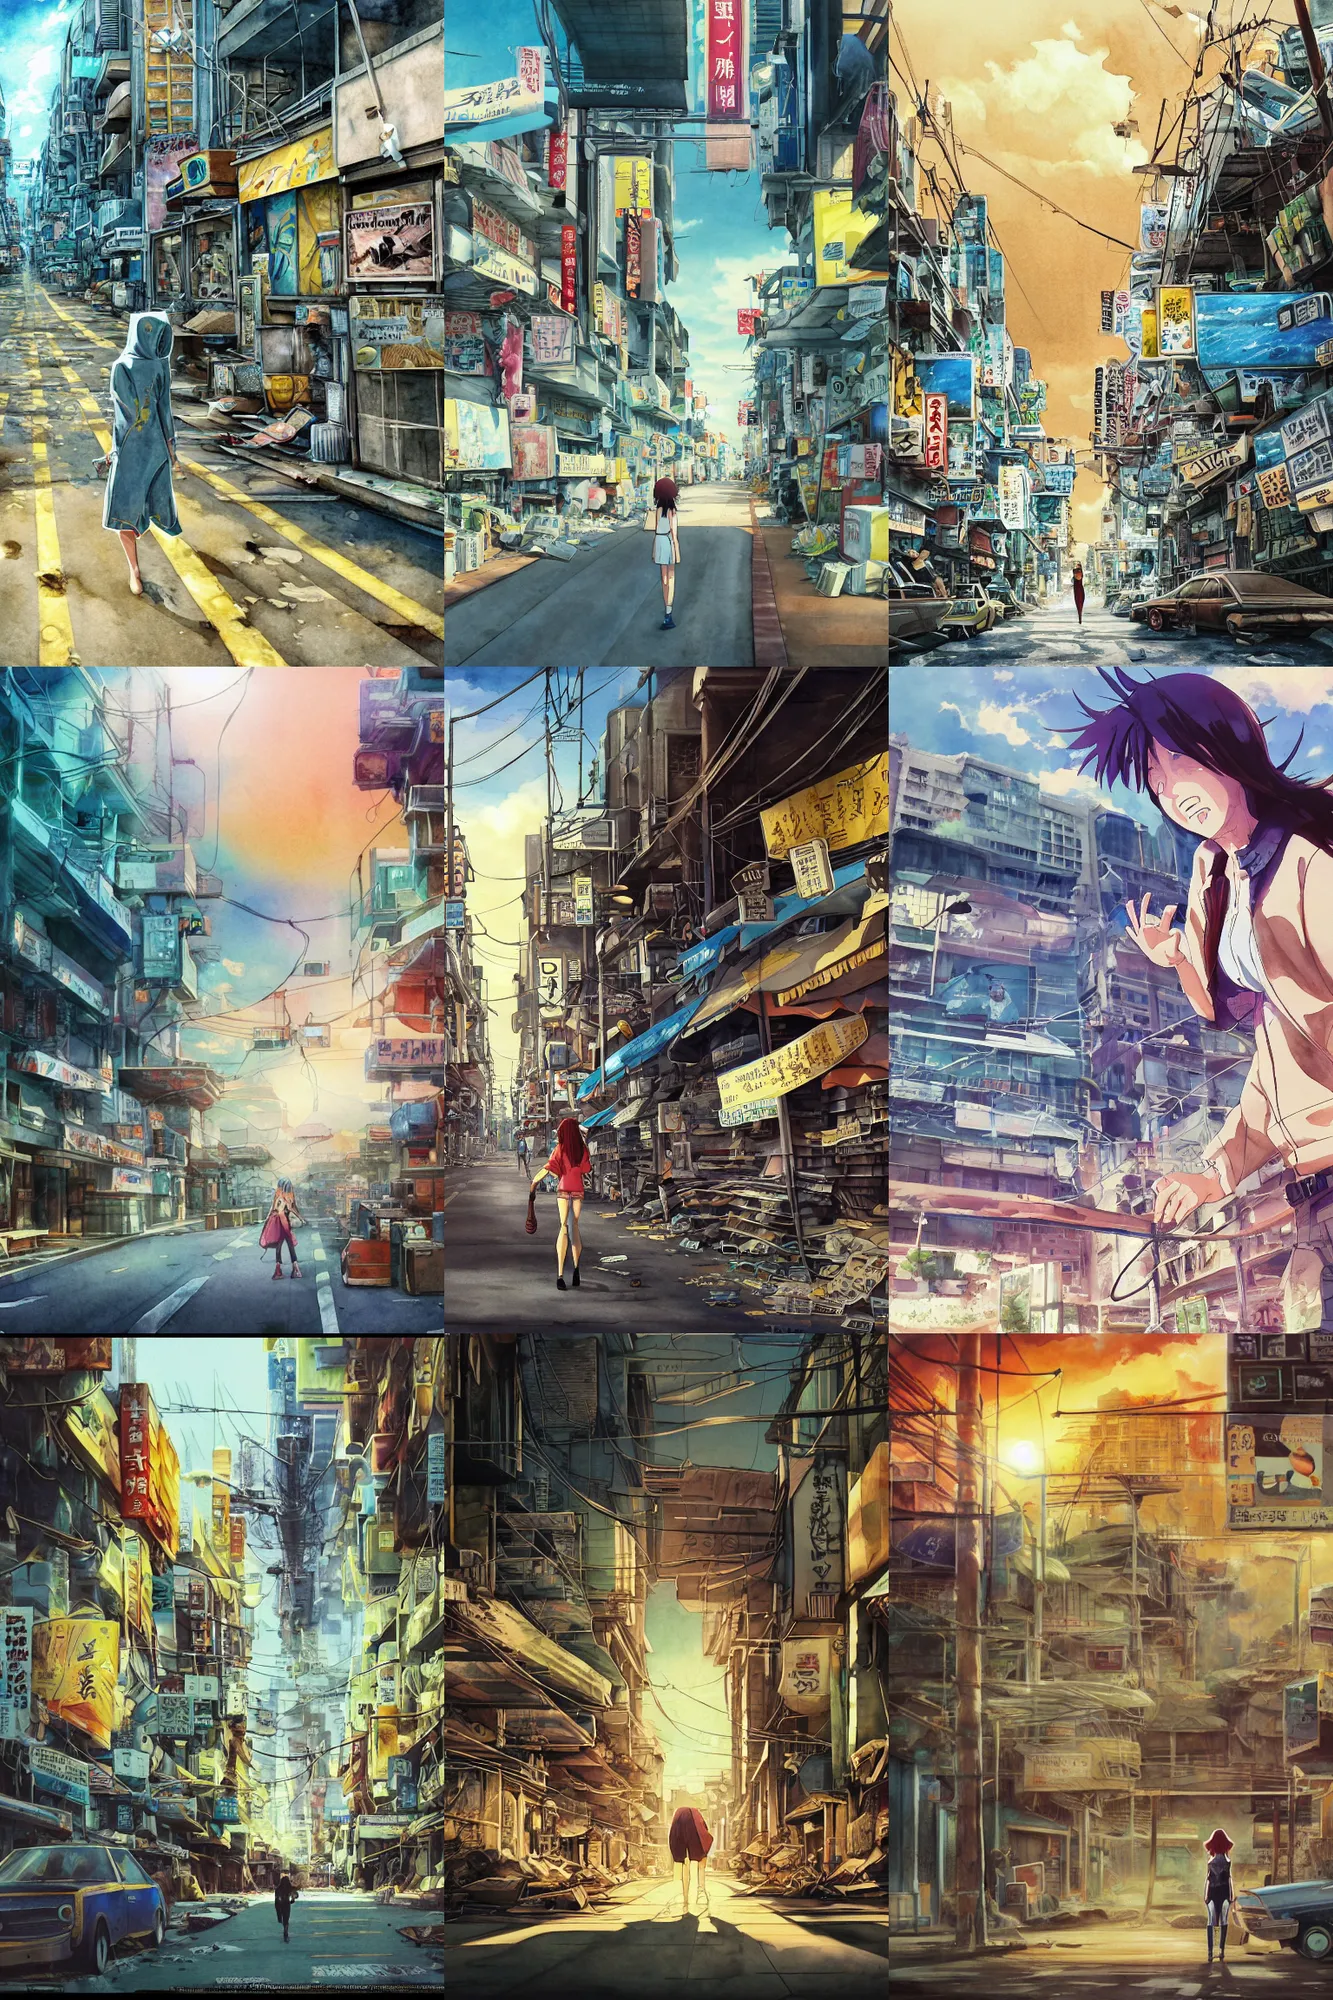 Prompt: incredible anime movie scene, vanishing point, hoody woman explorer, watercolor, underwater market, empty road, coral reef, billboards, harsh bloom lighting, rim light, abandoned city, paper texture, movie scene, caustic shadows, deserted shinjuku junk town, old pawn shop, bright sun ground, wires, telephone pole, pipes, yellow, red, dusty